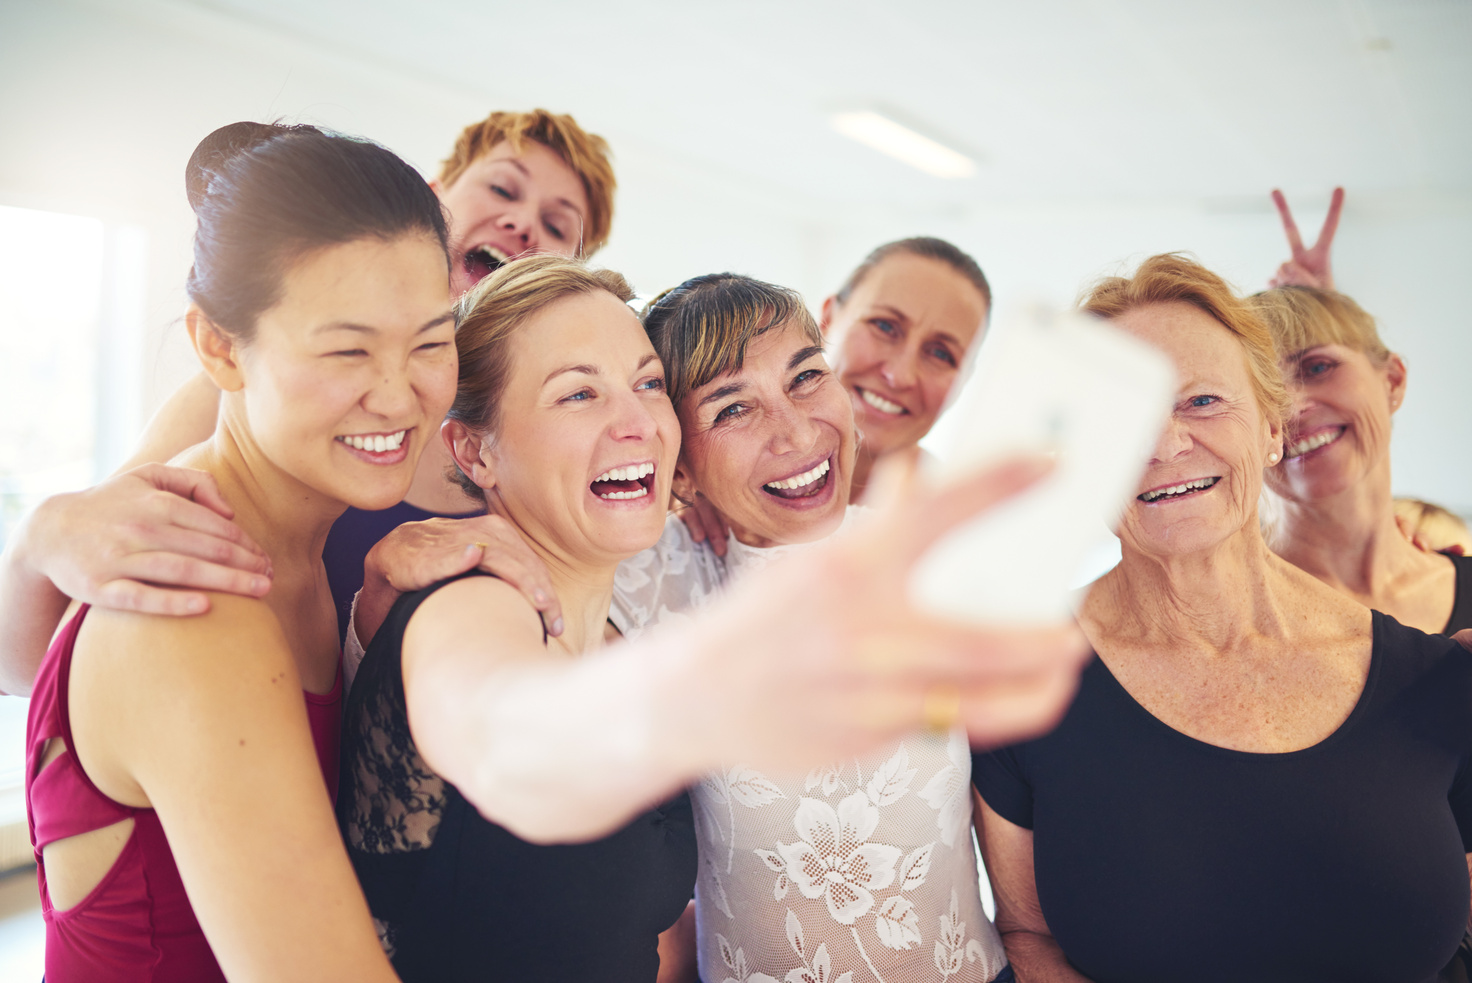 Group of Laughing Friends Taking Selfies 